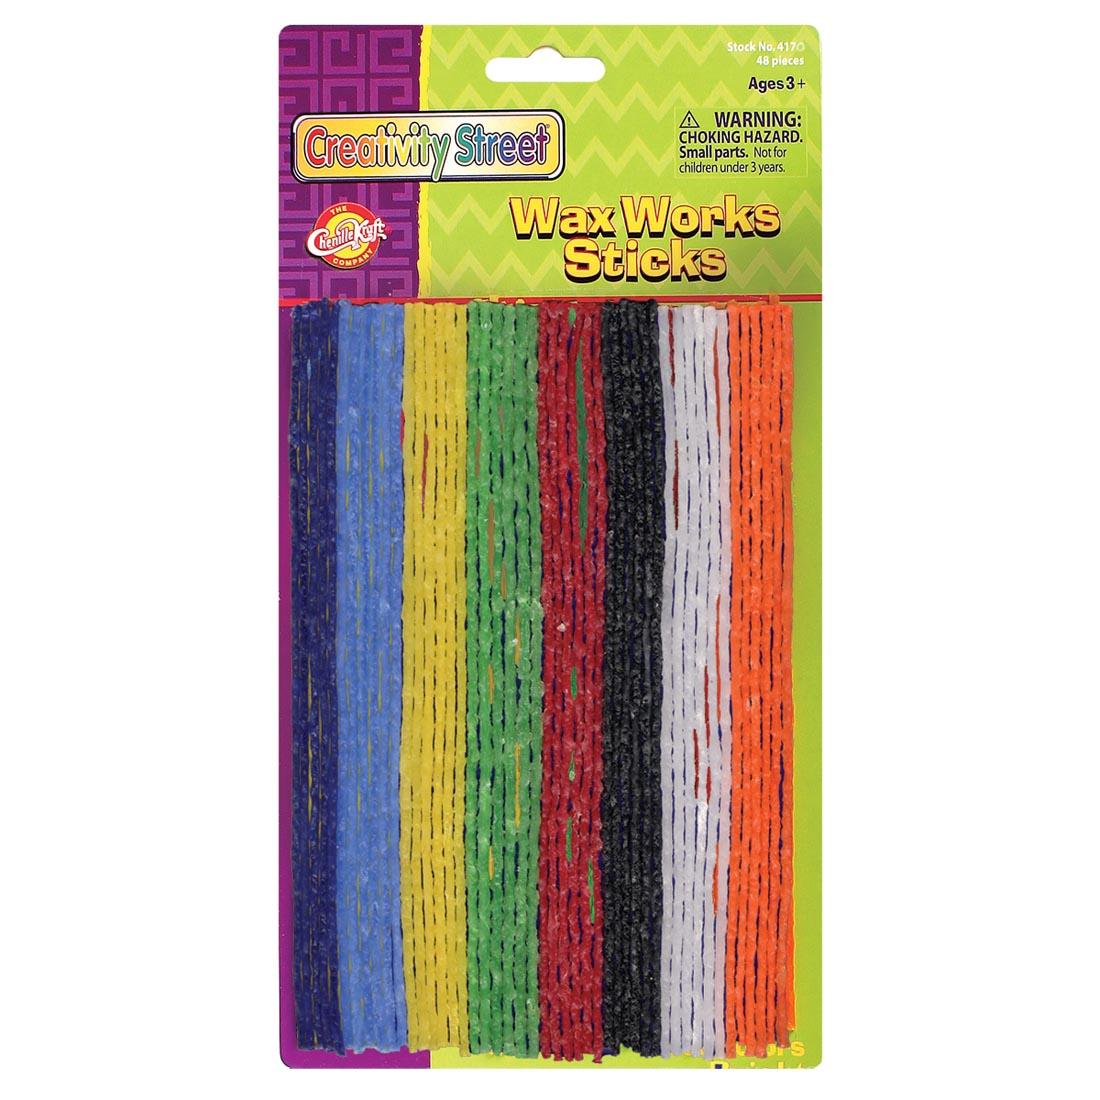 Creativity Street wax works sticks in assorted bright colors